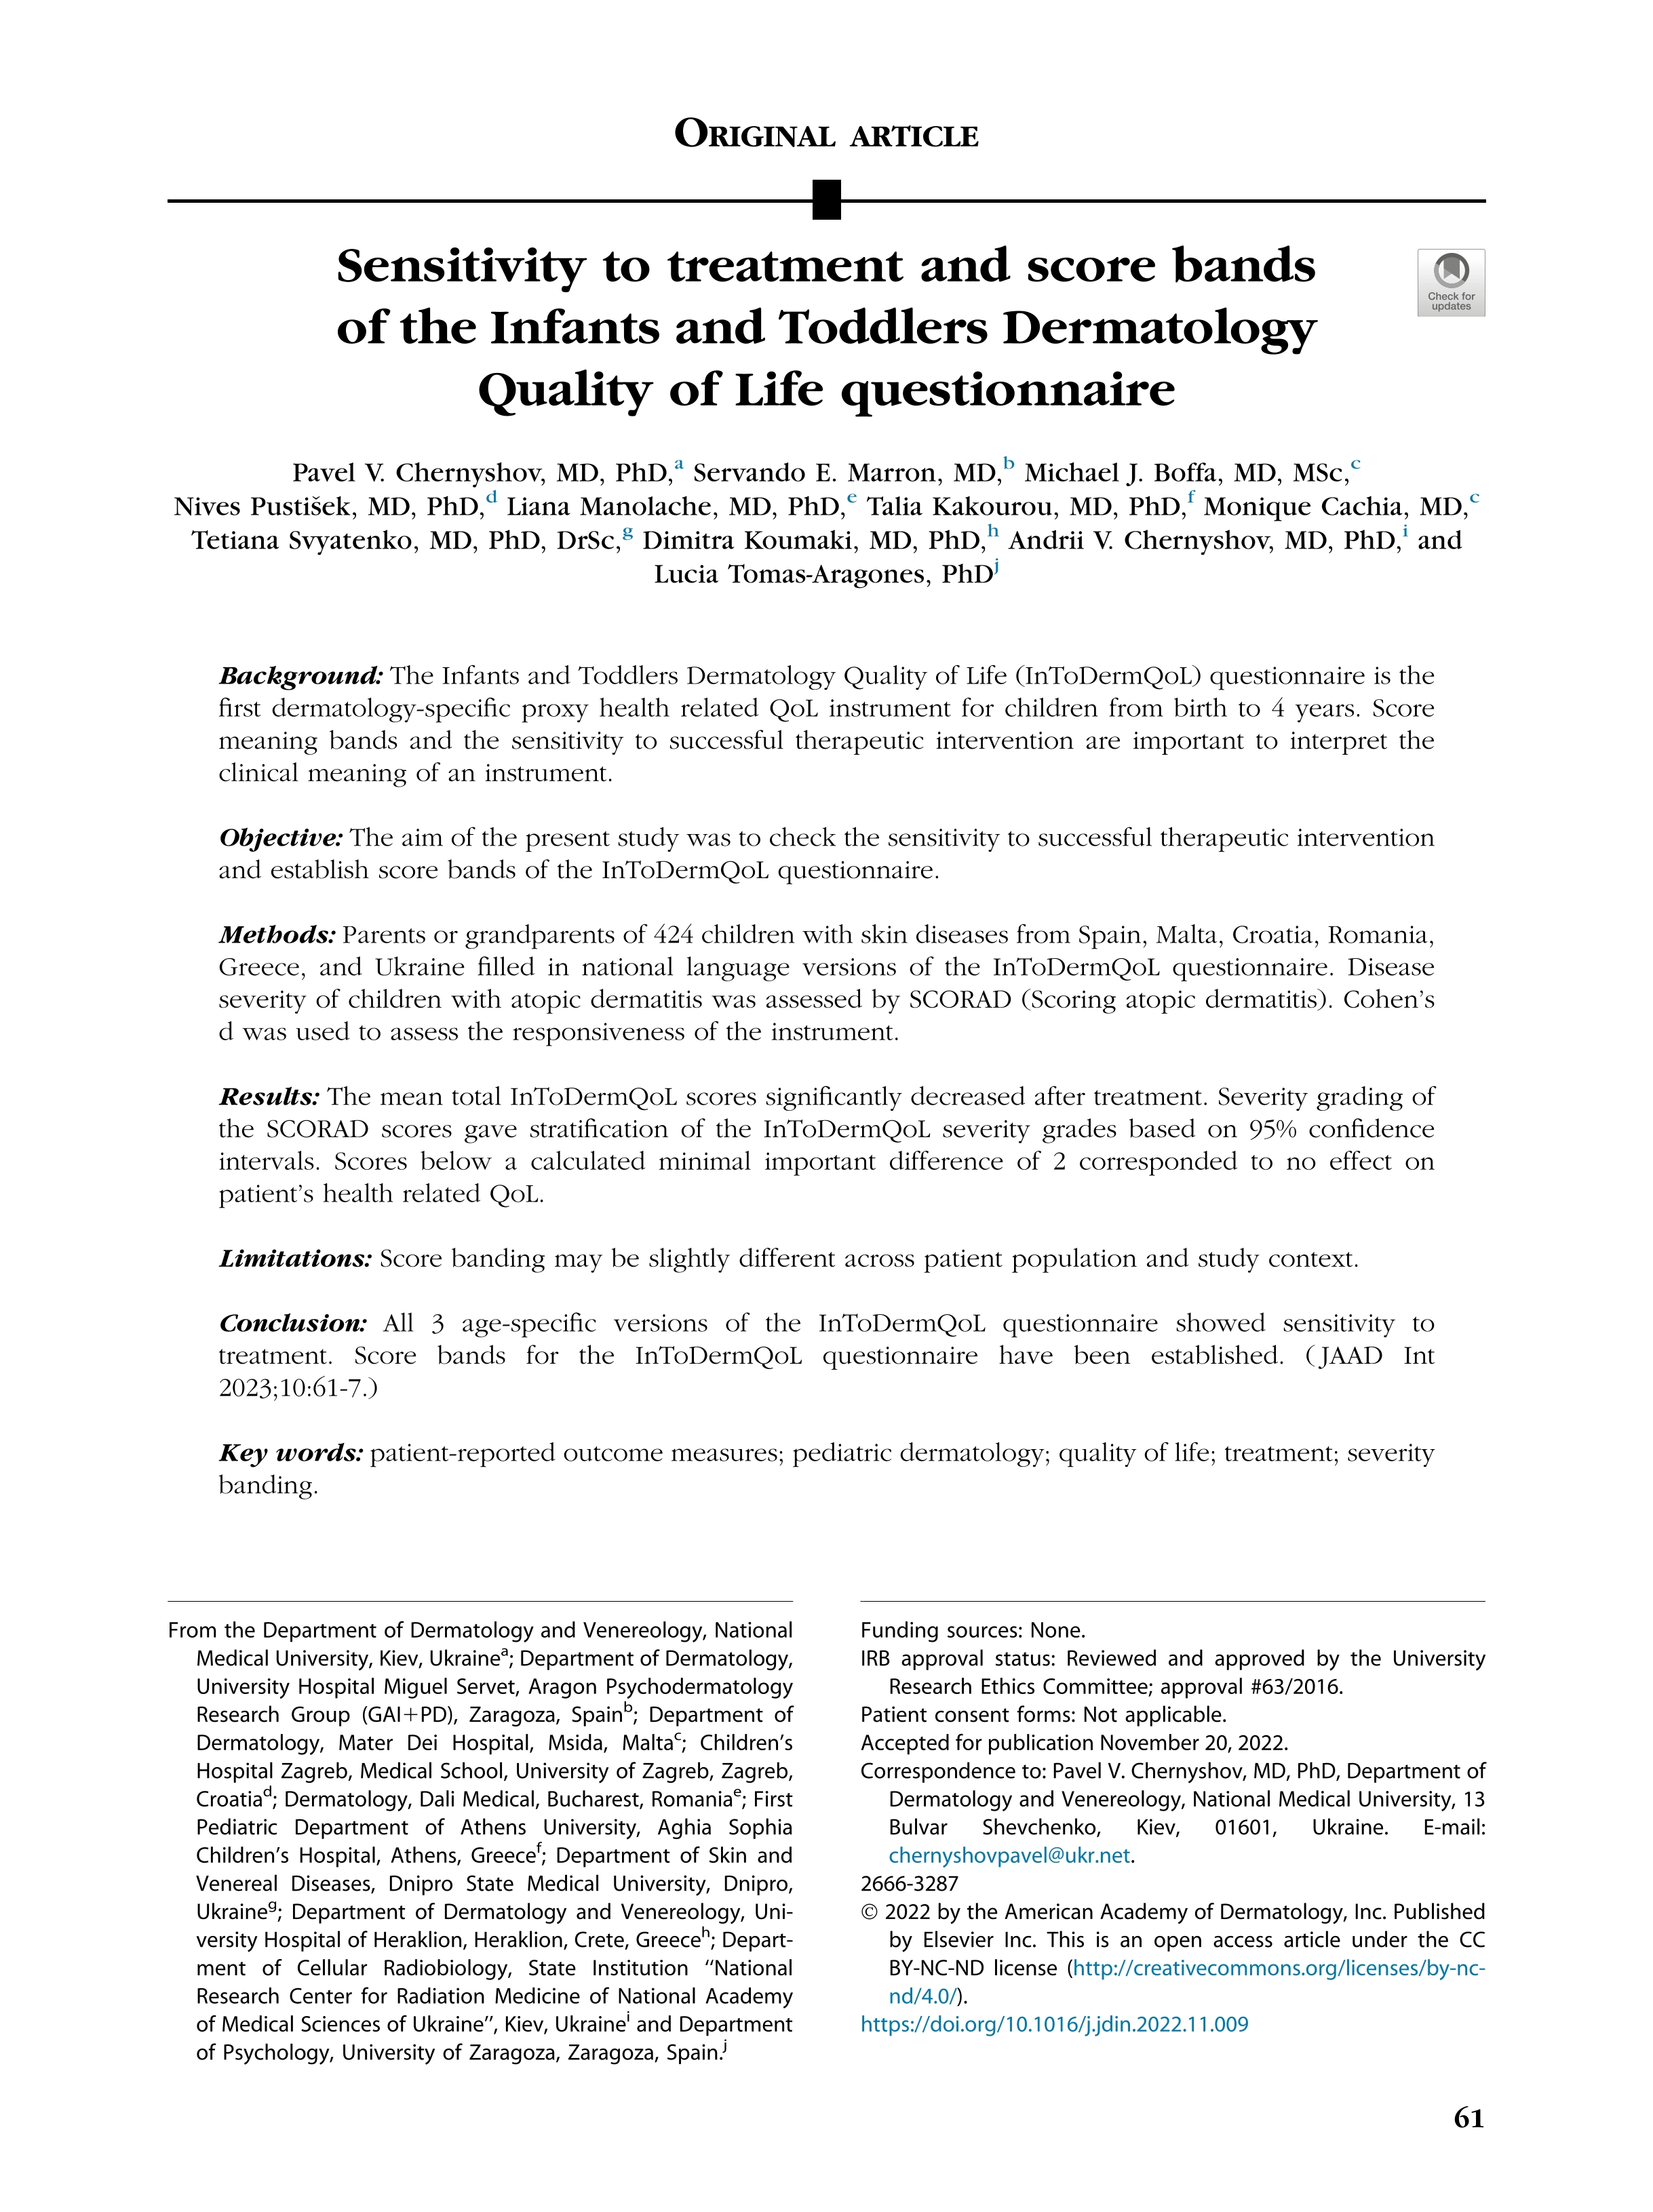 Sensitivity to treatment and score bands of the infants and toddlers dermatology quality of life questionnaire